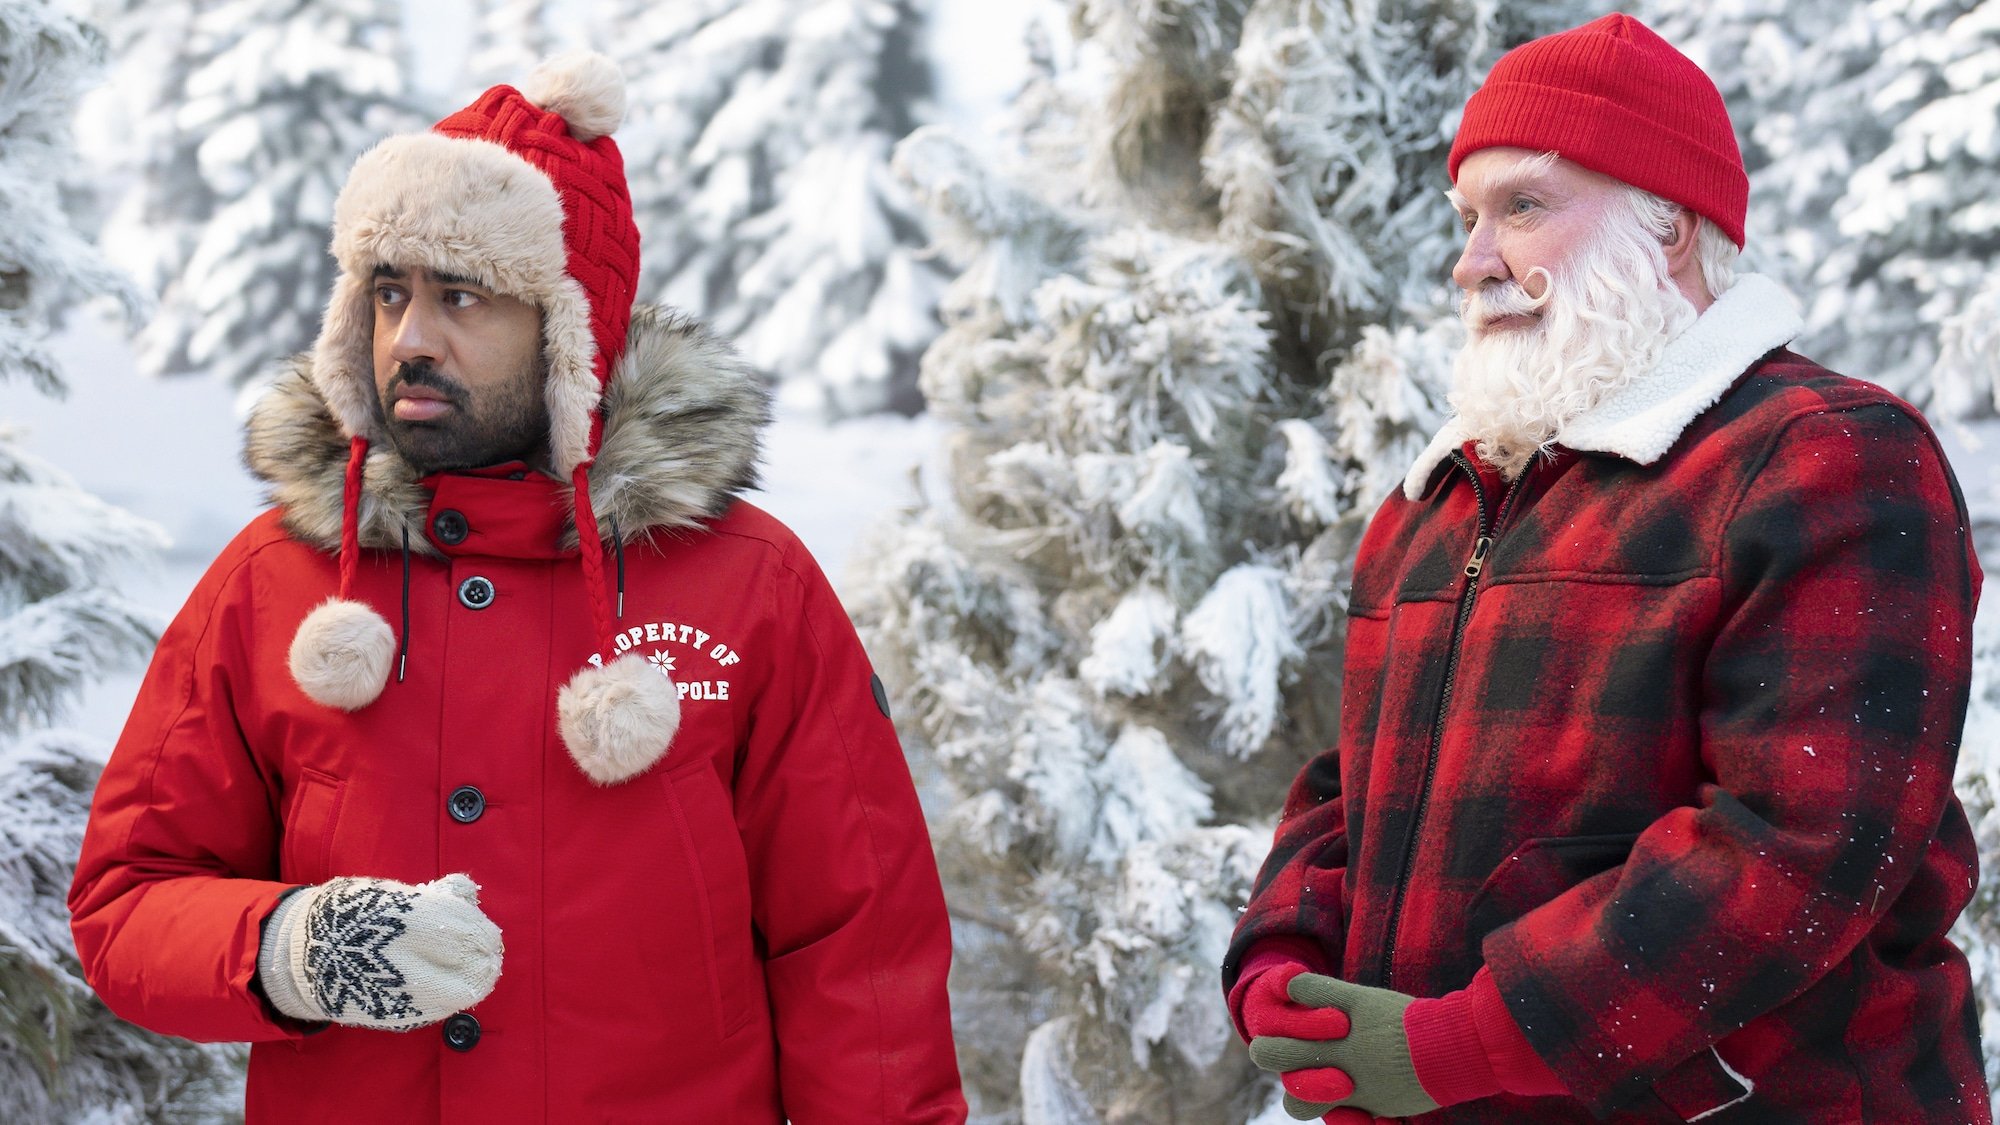 Will There Be The Santa Clauses Season 3 Release Date & Is It Coming Out?